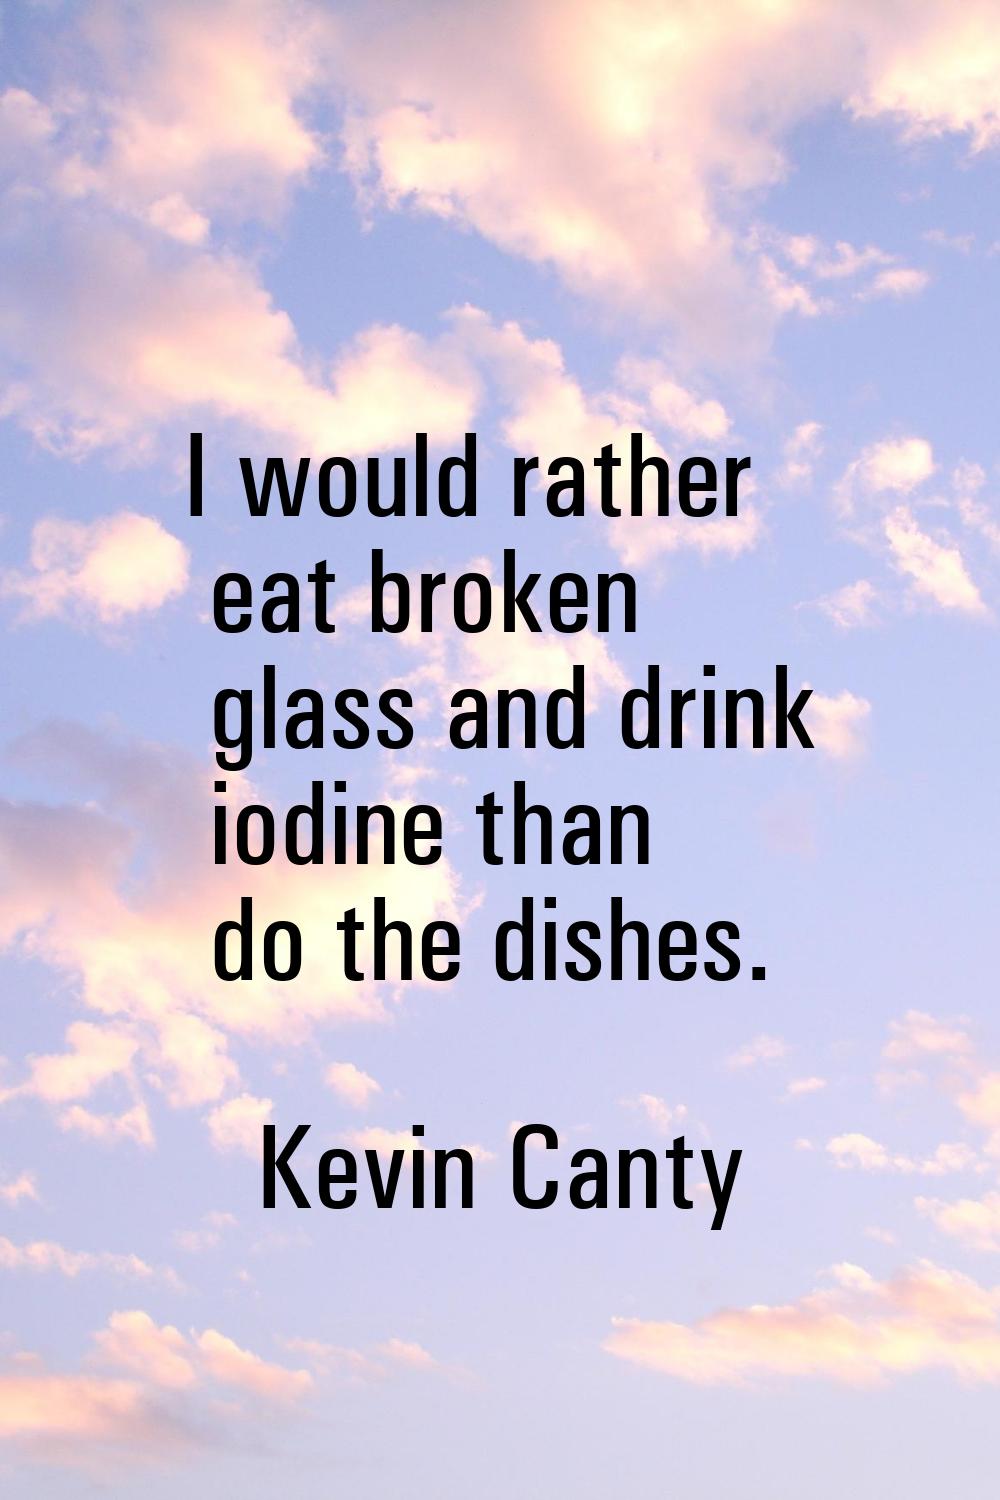 I would rather eat broken glass and drink iodine than do the dishes.